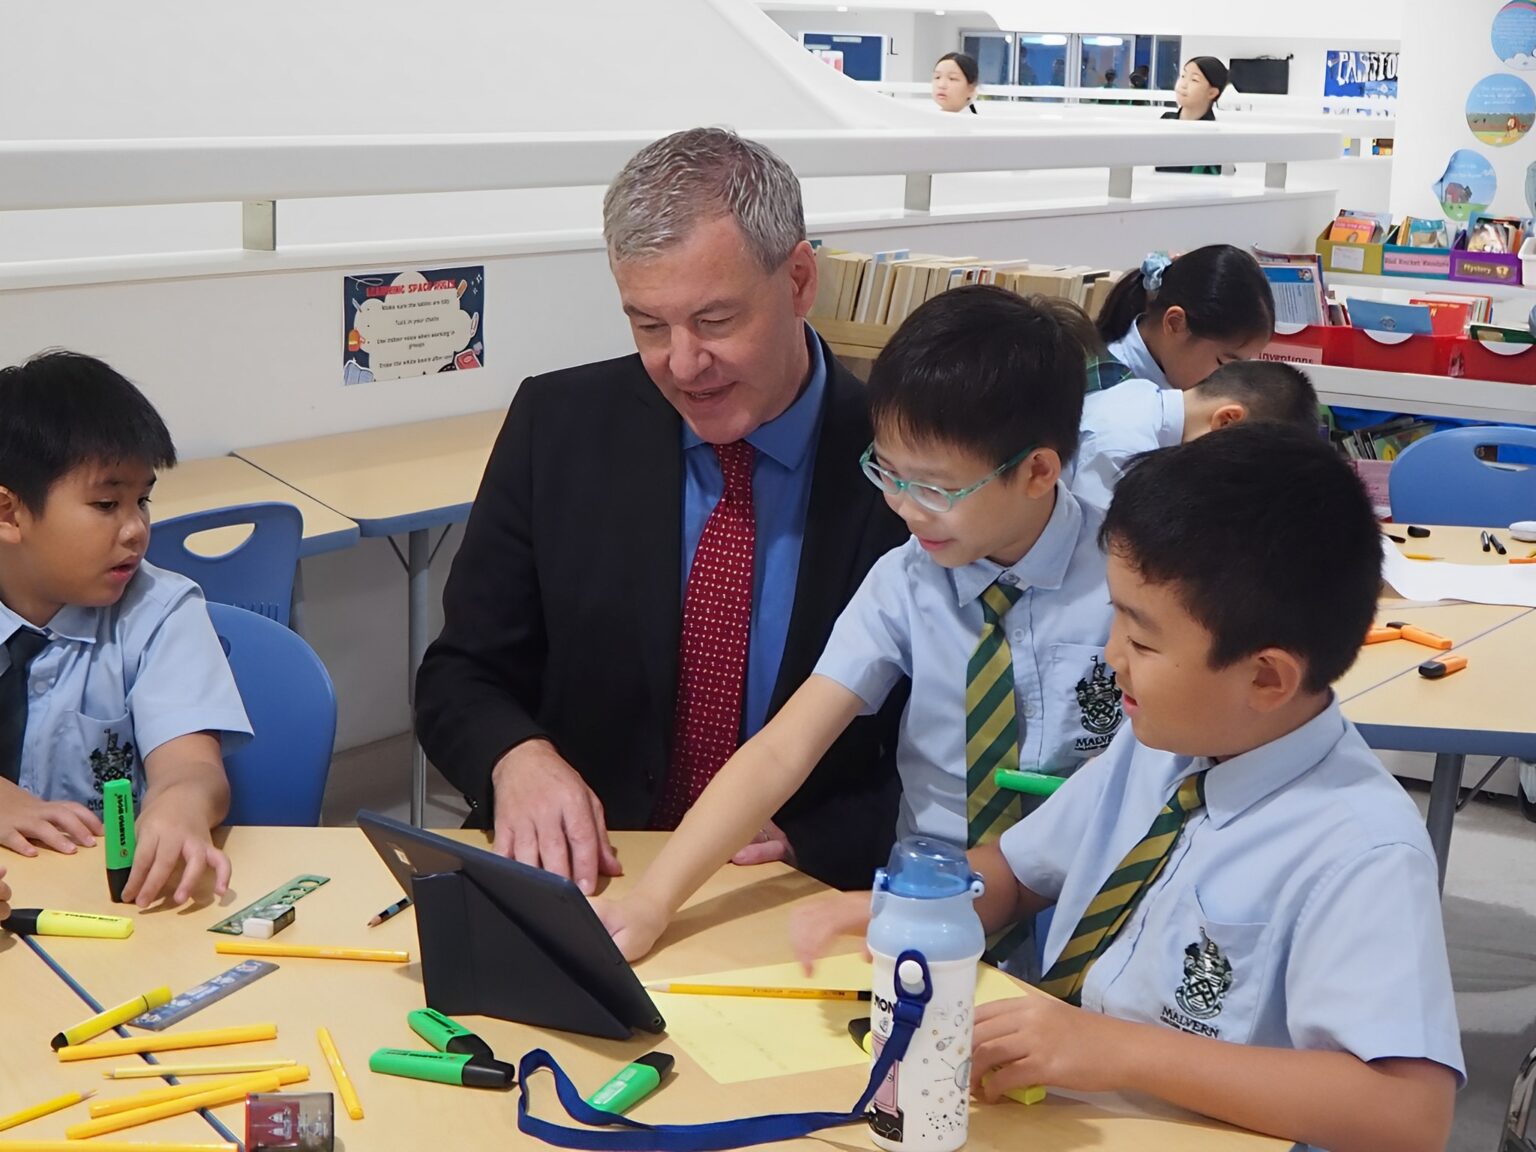 The principal of Malvern College Hong Kong sits among young students in a classroom. They are all looking at a tablet. The table at which they are seated has pencils, highlighters, rulers, and other stationery on it.